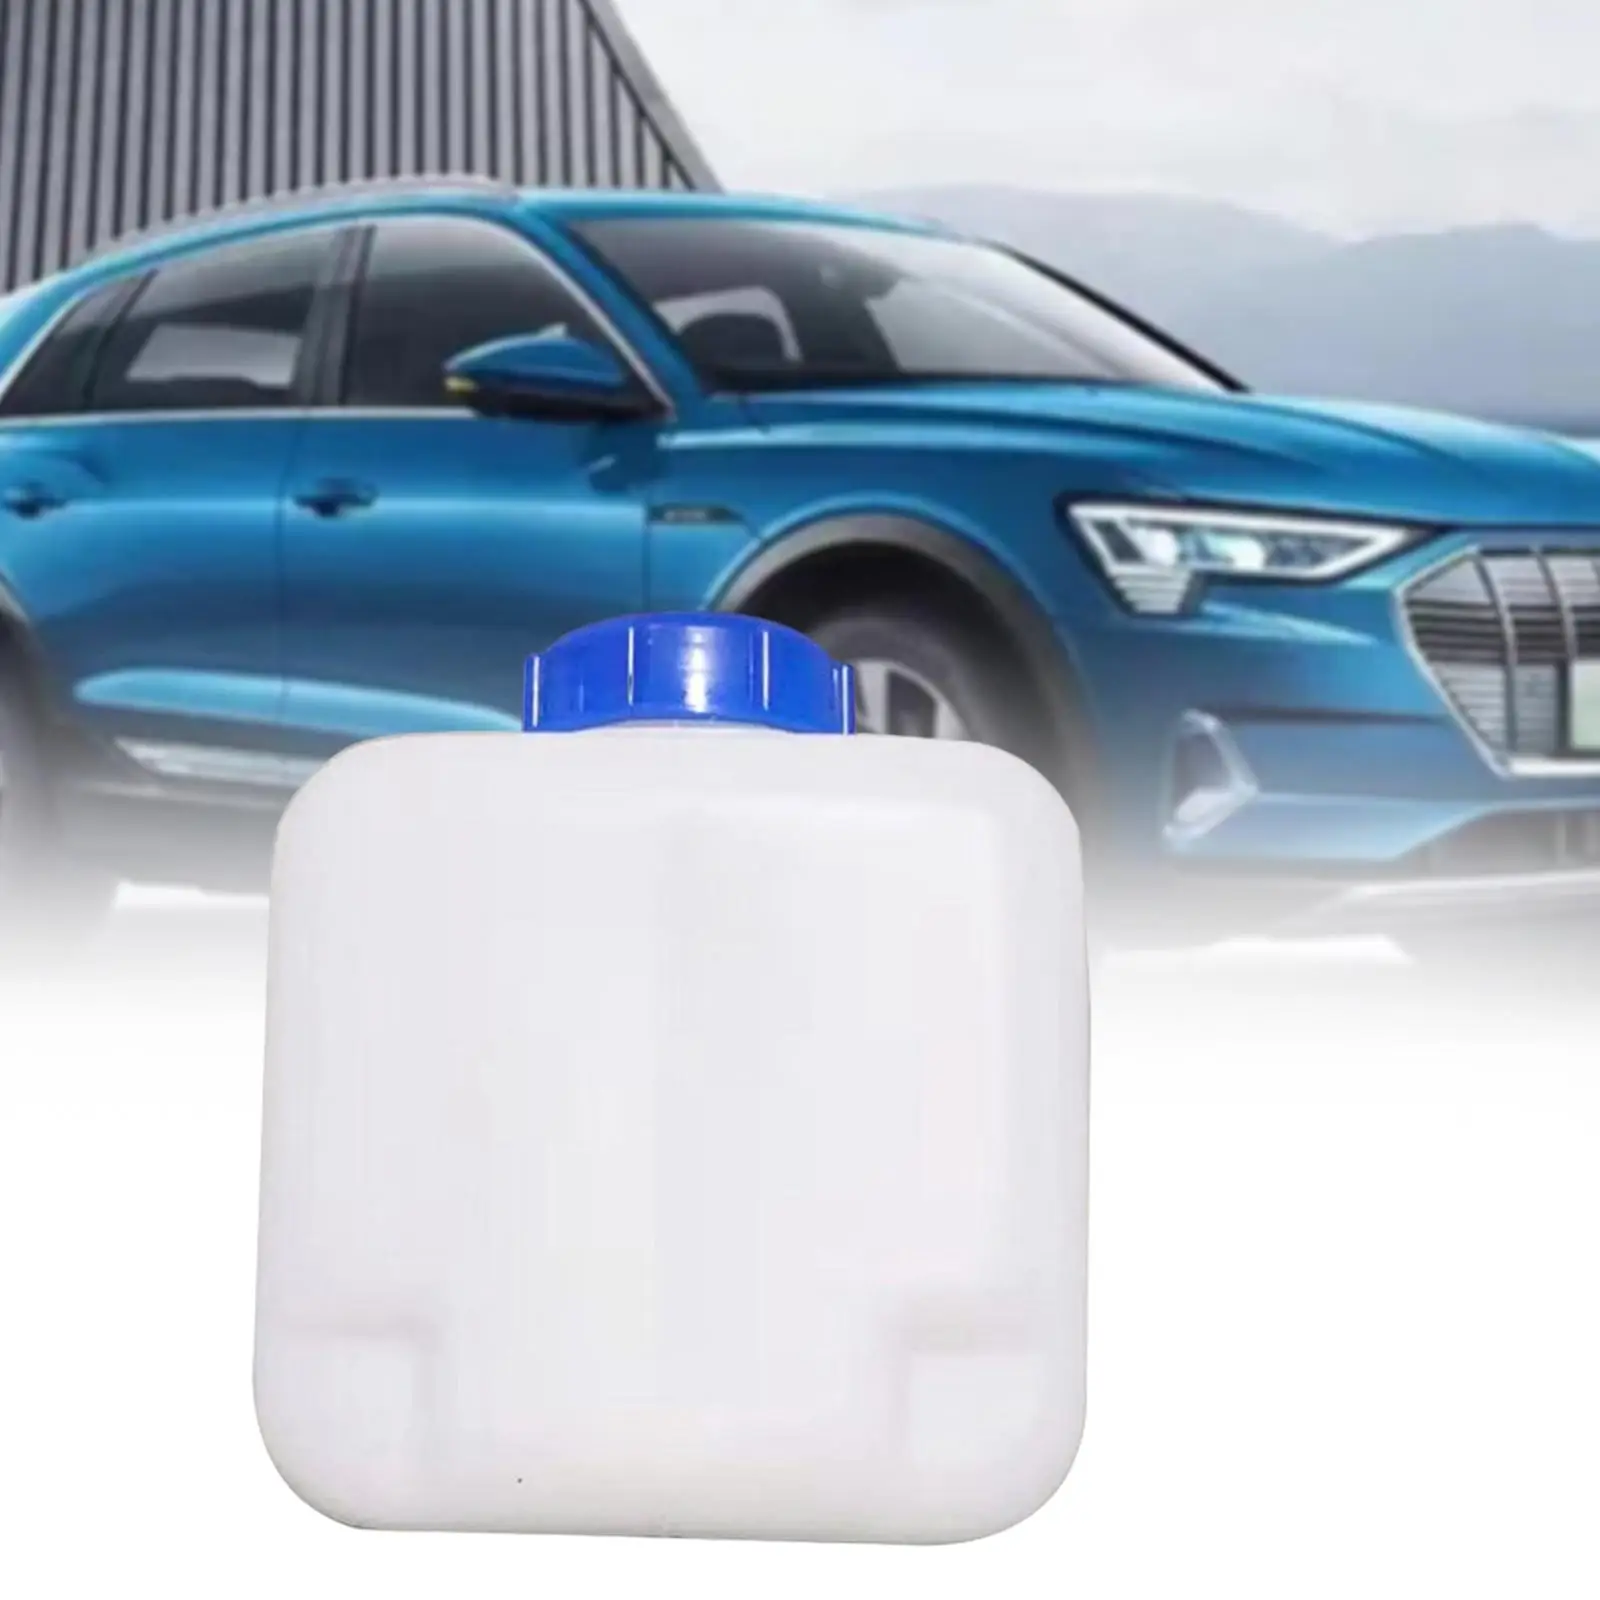 Sturdy Gasoline Petrol Tank Heat Resistant Container Jar Portable 5L for Air Parking Heater Vehicle Car Replaces Assembly